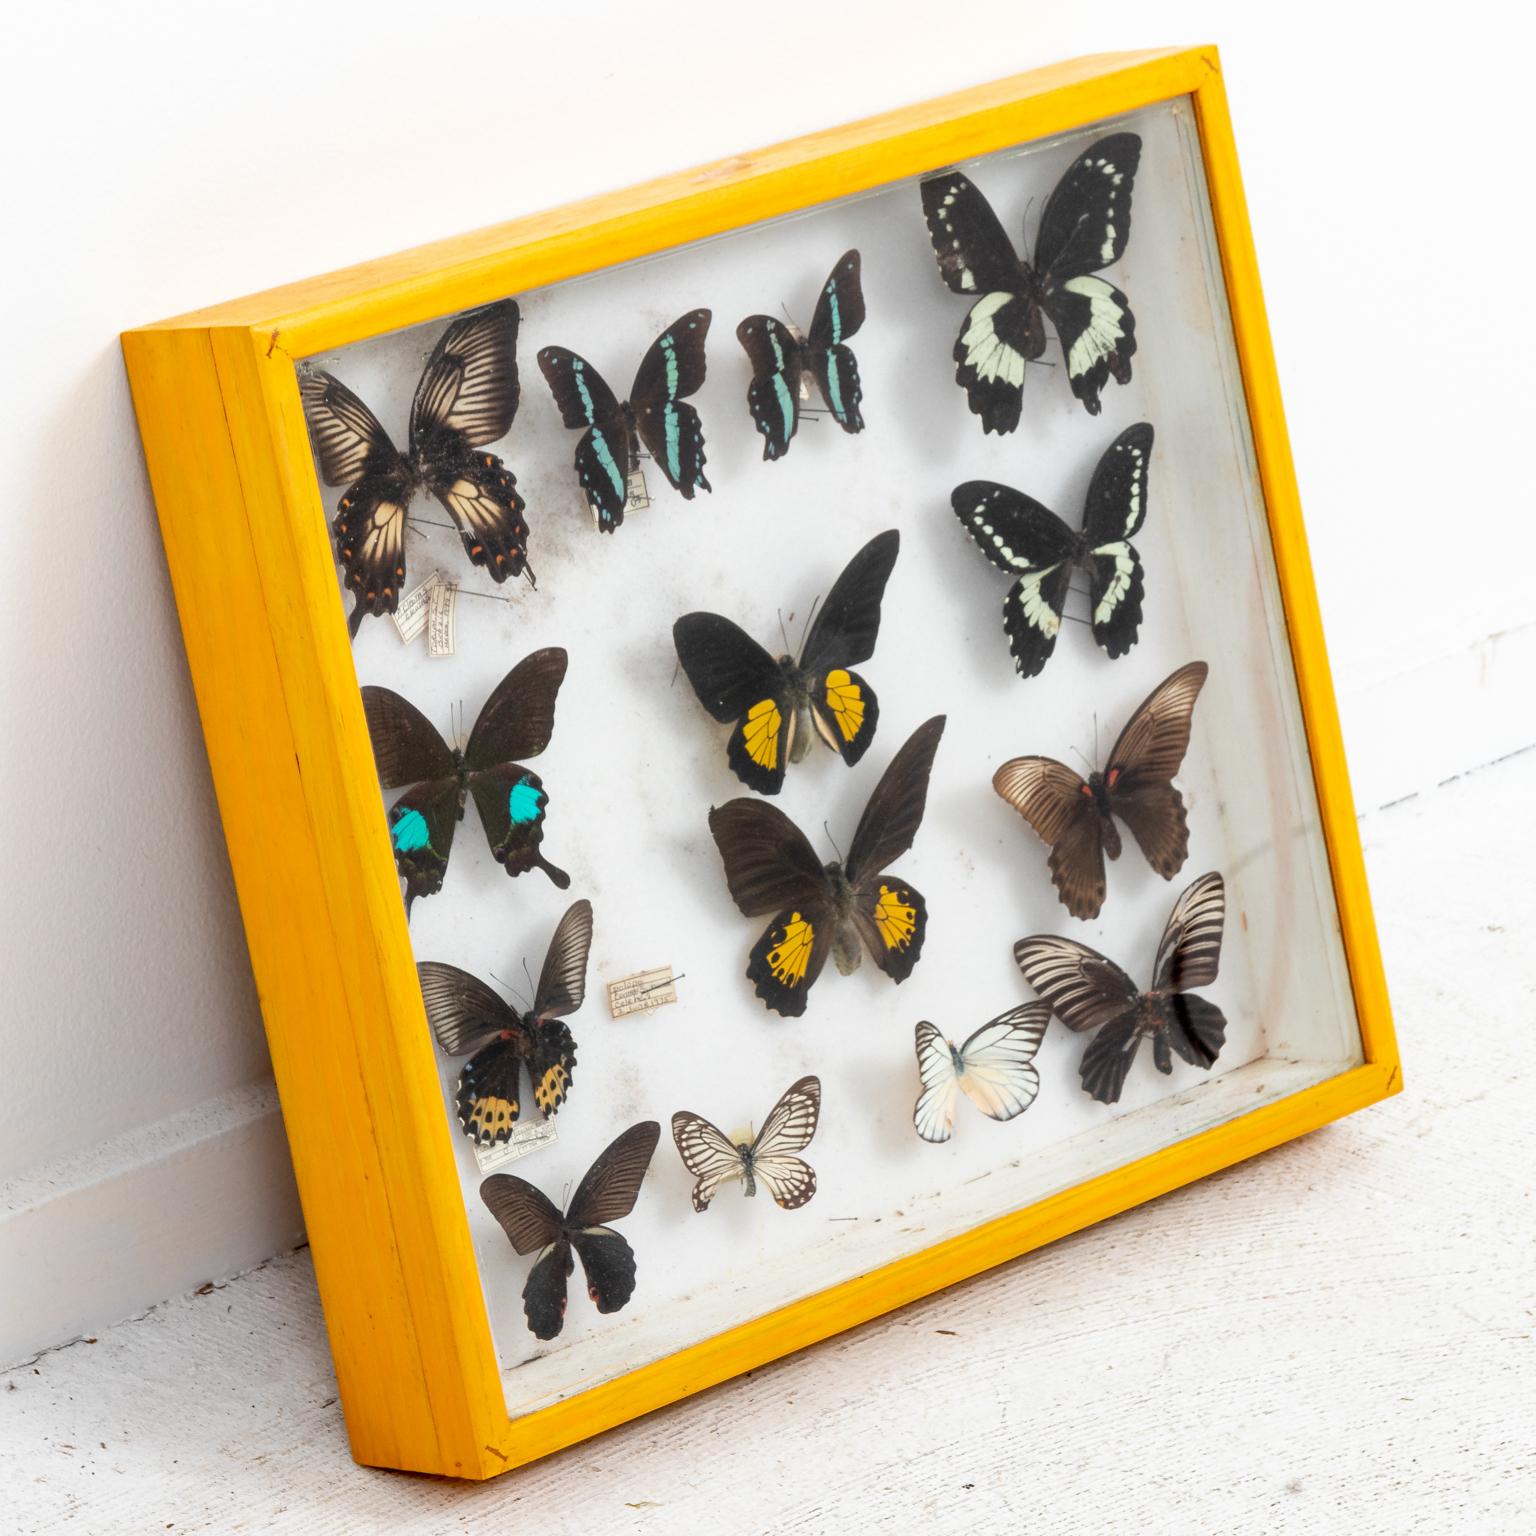 Circa 1970-1980s pair of butterfly boxes in glass fronted Cornell boxes. The pieces were collected in Ecuador by Professor Ivo Klik of Tuft University. All specimens are pin mounted with data tags: blues, coppers ,hairstreaks, and satyrs. Please